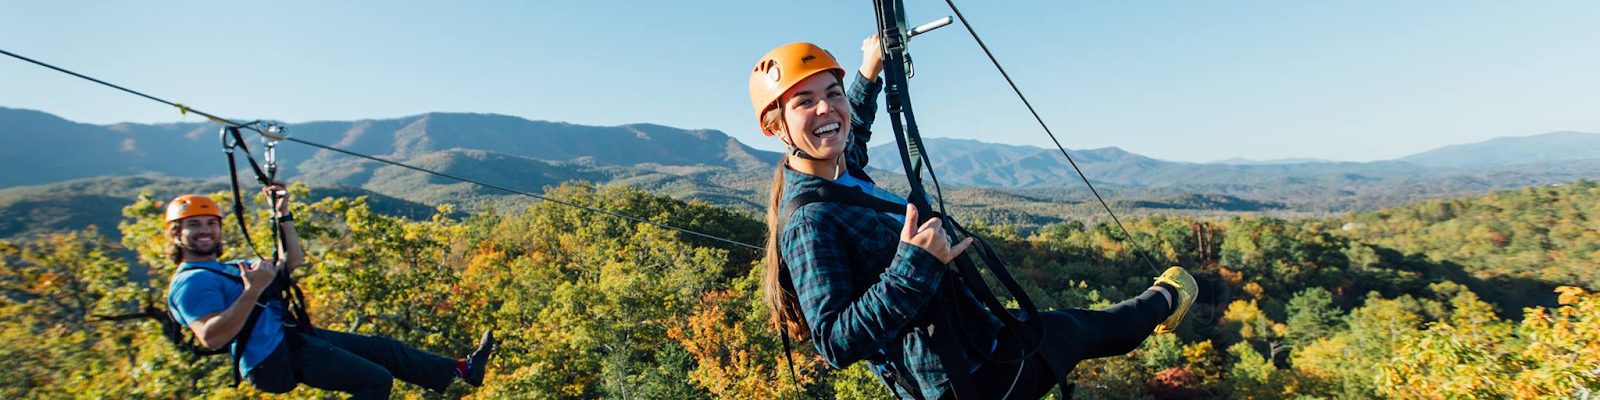 Adventure America Zipline Canopy Tours Pigeon Forge Coupons